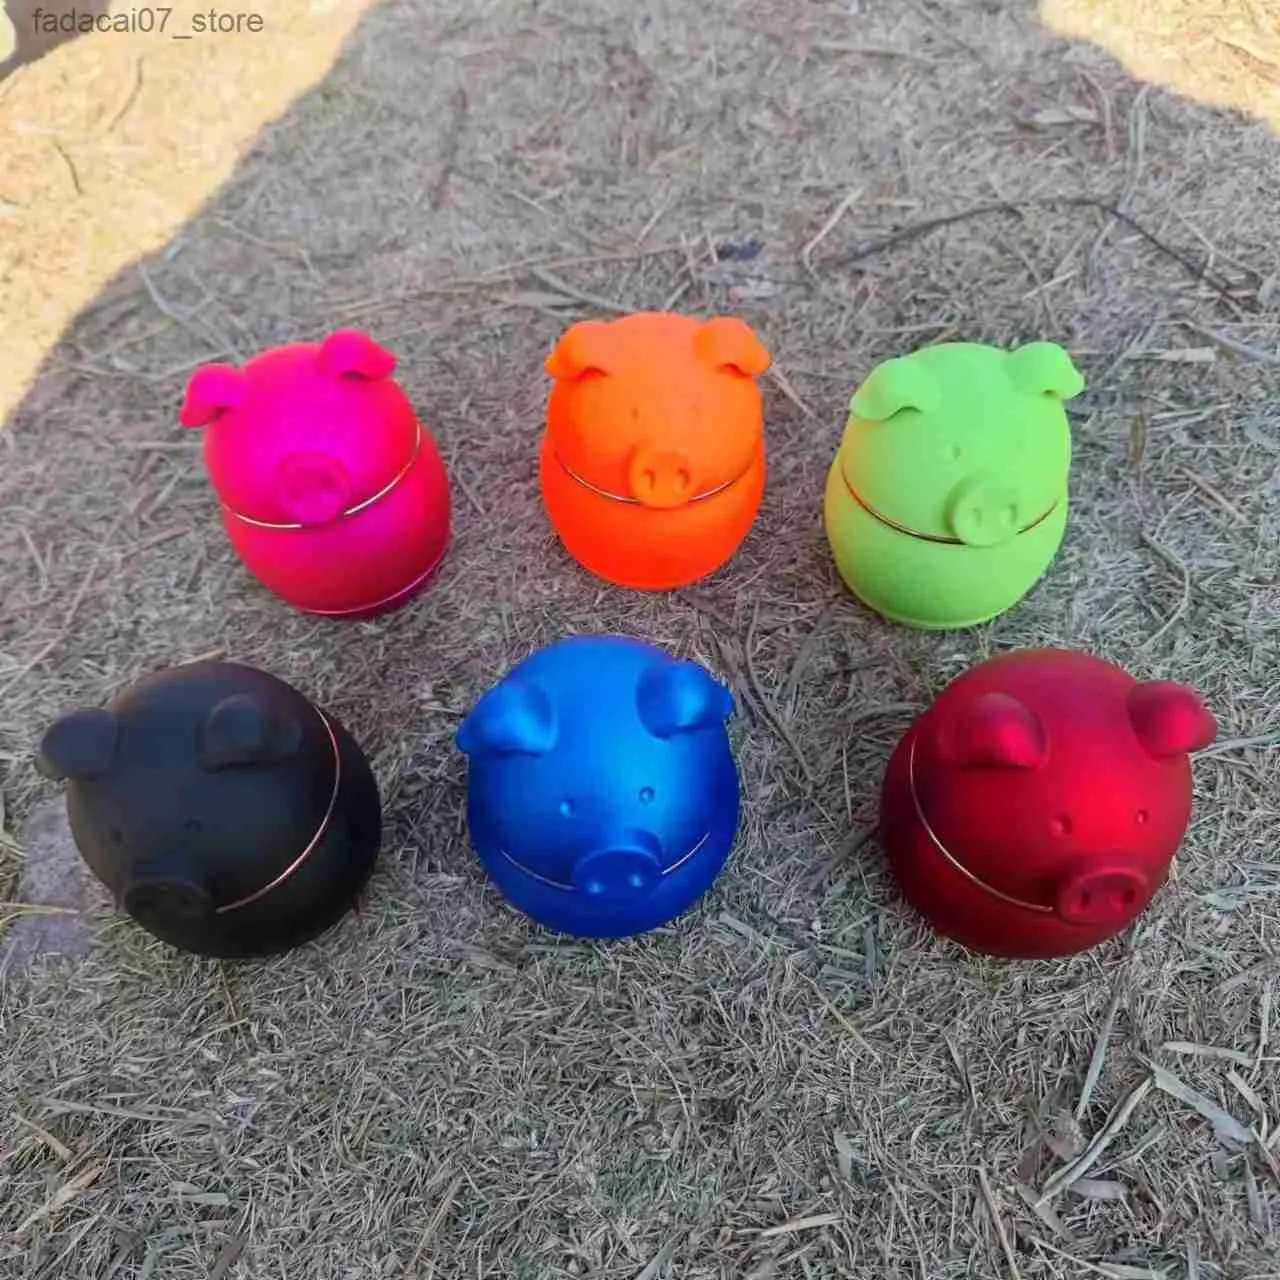 Herb Grinder The new 7cm cute pig shaped grinder cigarette accessory comes in multiple colors Q240408